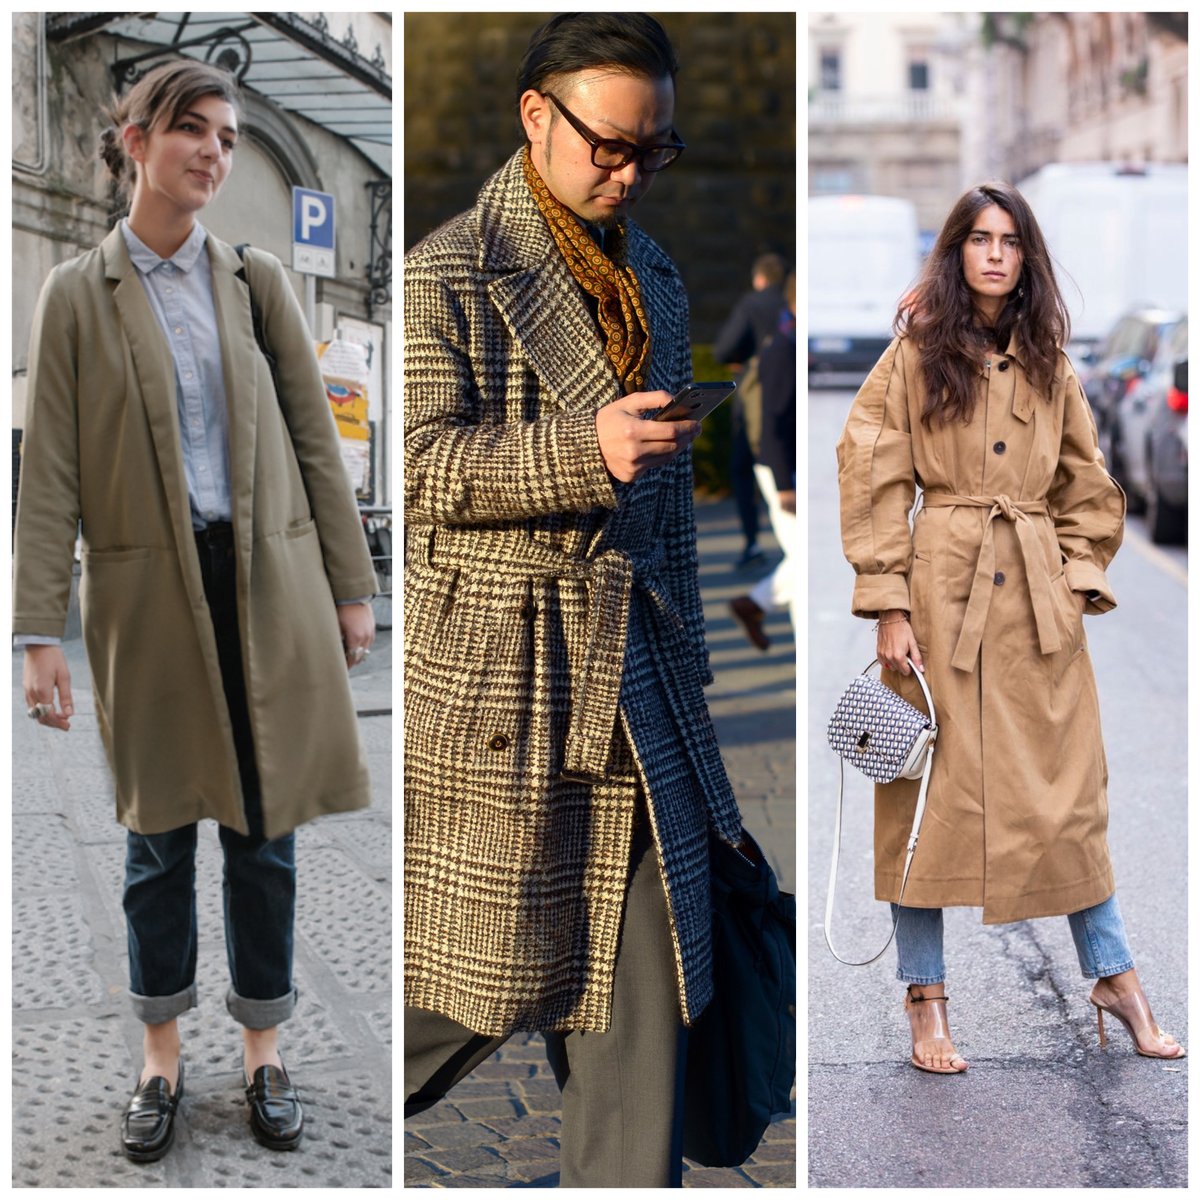 Still a little chilly in the morning? Jazz it up with a jacket! Long coats have been a trend for a while and are never a bad addition to an outfit! #bringonthefashion #justajacket #fastfashionfacts